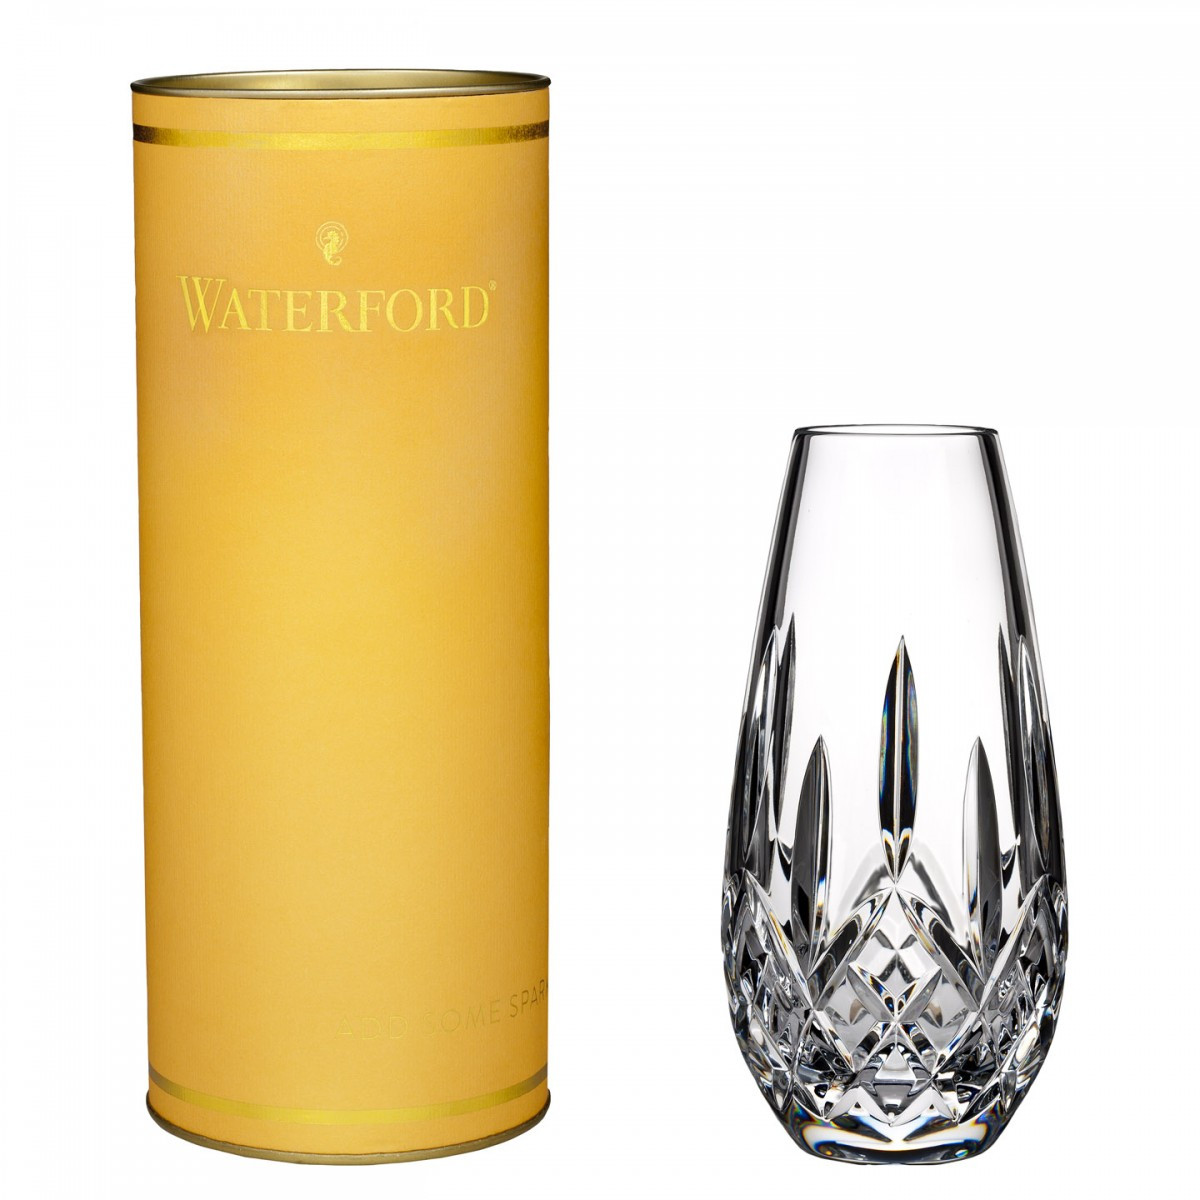 10 Fabulous Waterford Lismore Vase 8 2024 free download waterford lismore vase 8 of gilsonsonline fine crystal gifts and engraving vases for giftology lismore honey bud vase